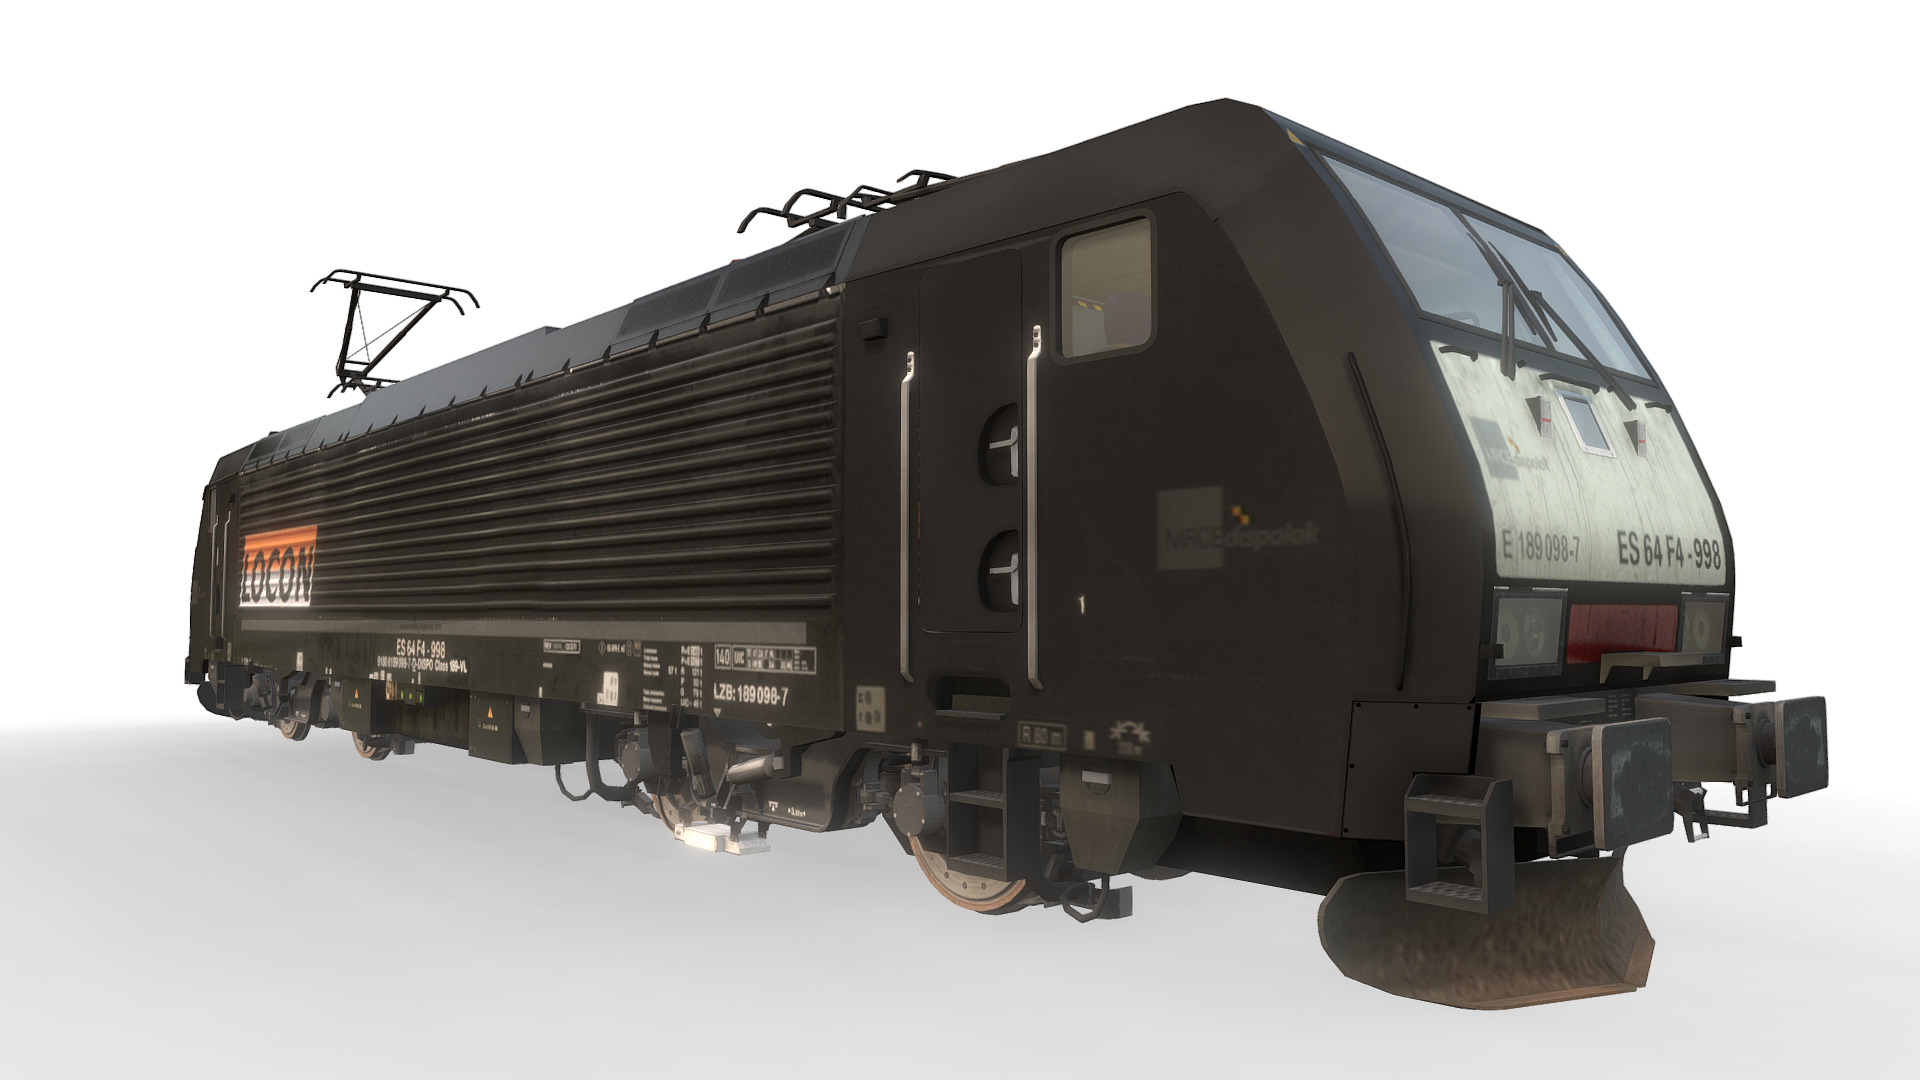 3D model Locomotive ES64F4 – 189 098-7 – MRCE / LOCON - This is a 3D model of the Locomotive ES64F4 - 189 098-7 - MRCE / LOCON. The 3D model is about a black vehicle with a white background.